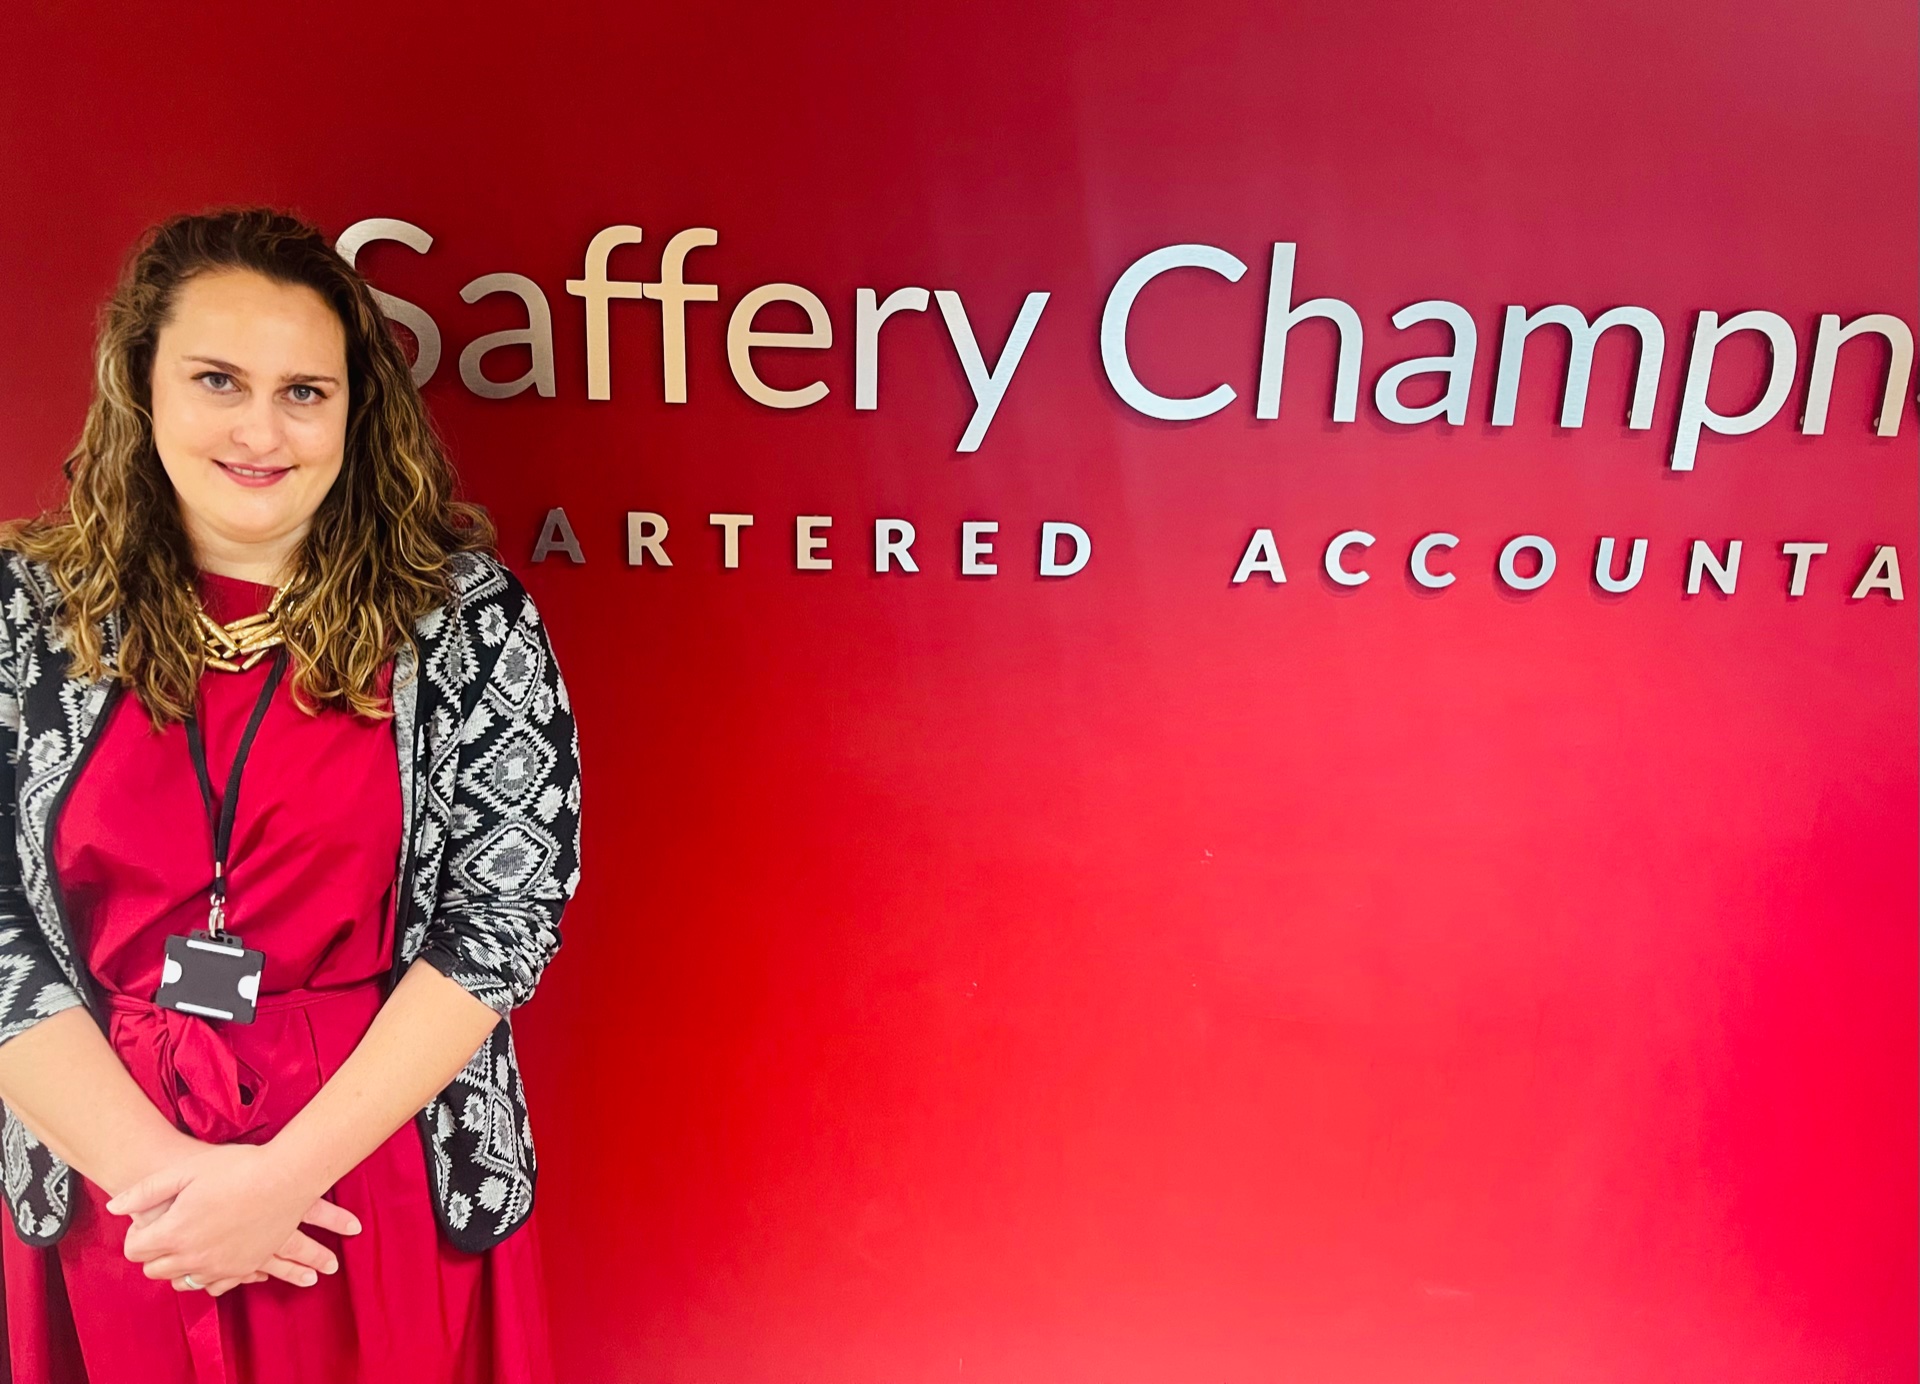 Gemma joins Landed Estates & Rural Team at Saffery Champness Chartered Accountants in Bournemouth